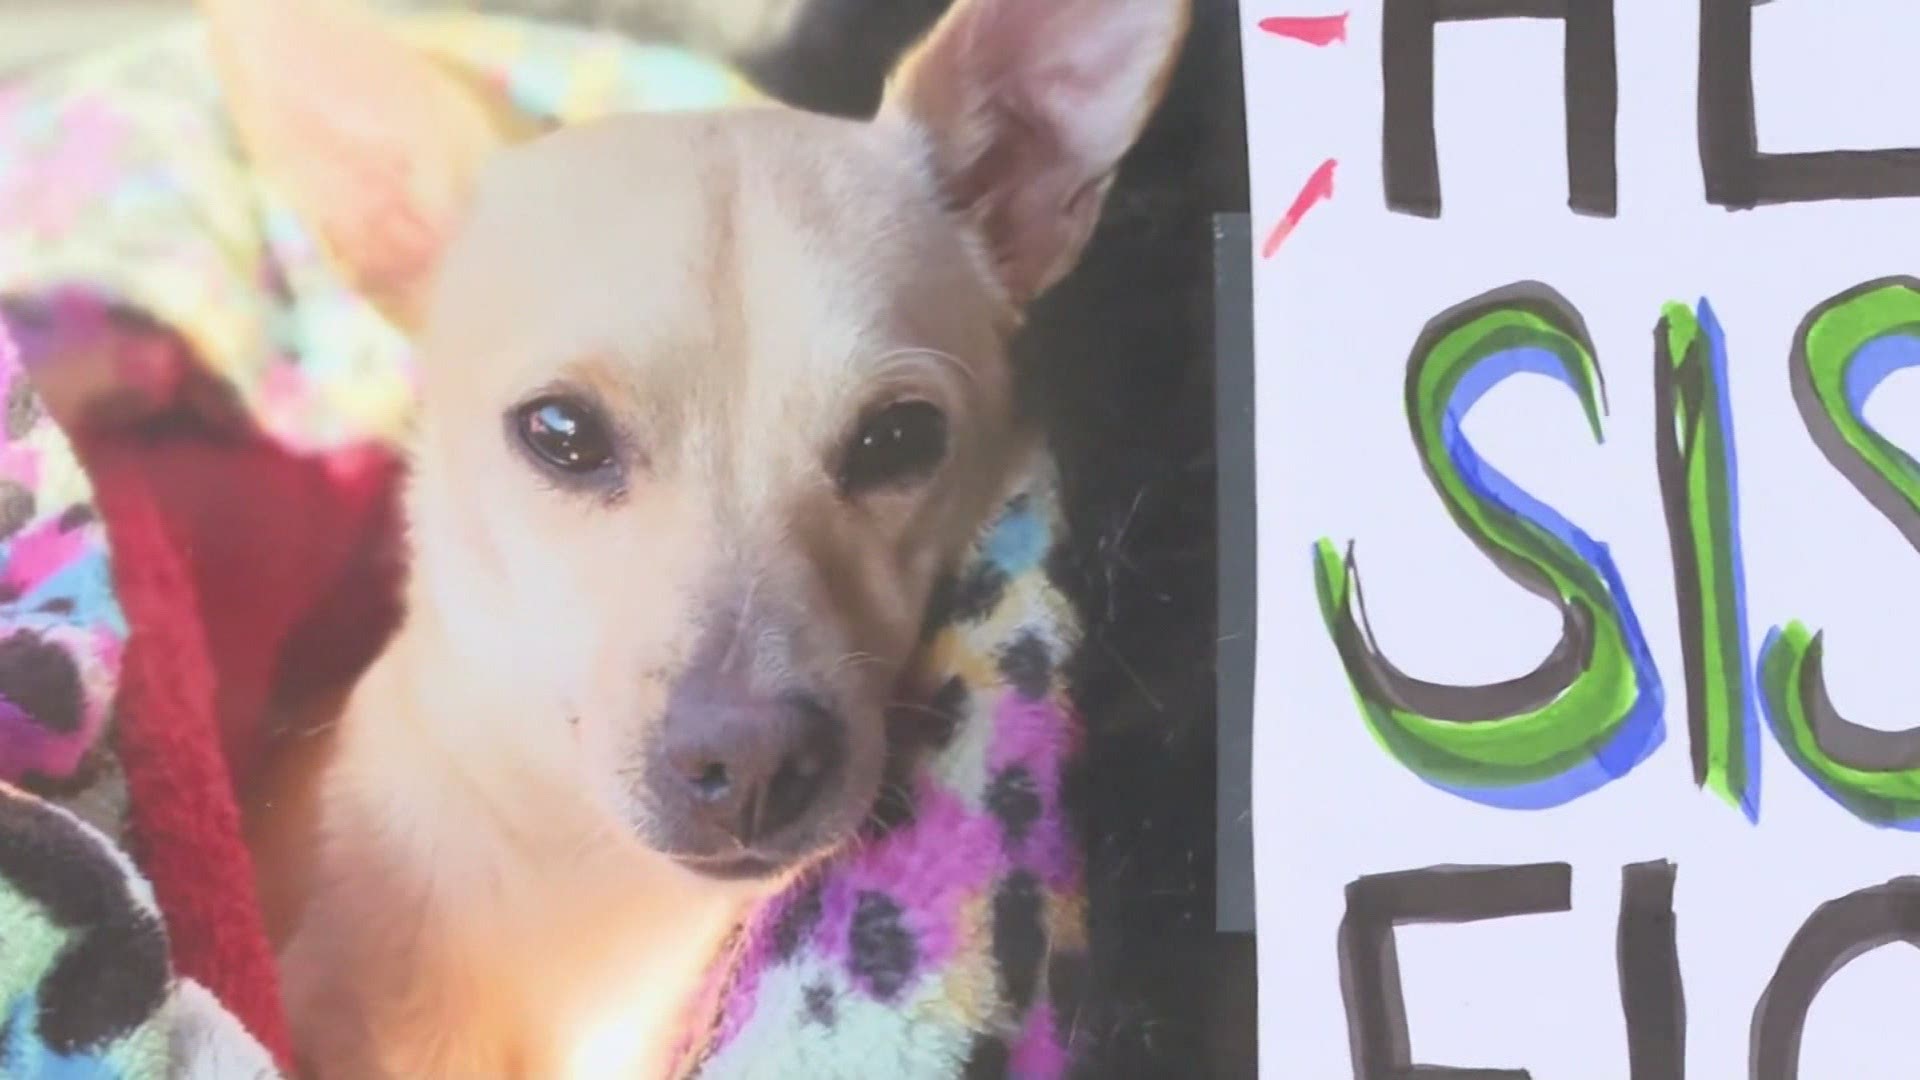 One sick dog in Kansas is going to get the treatment she needs.